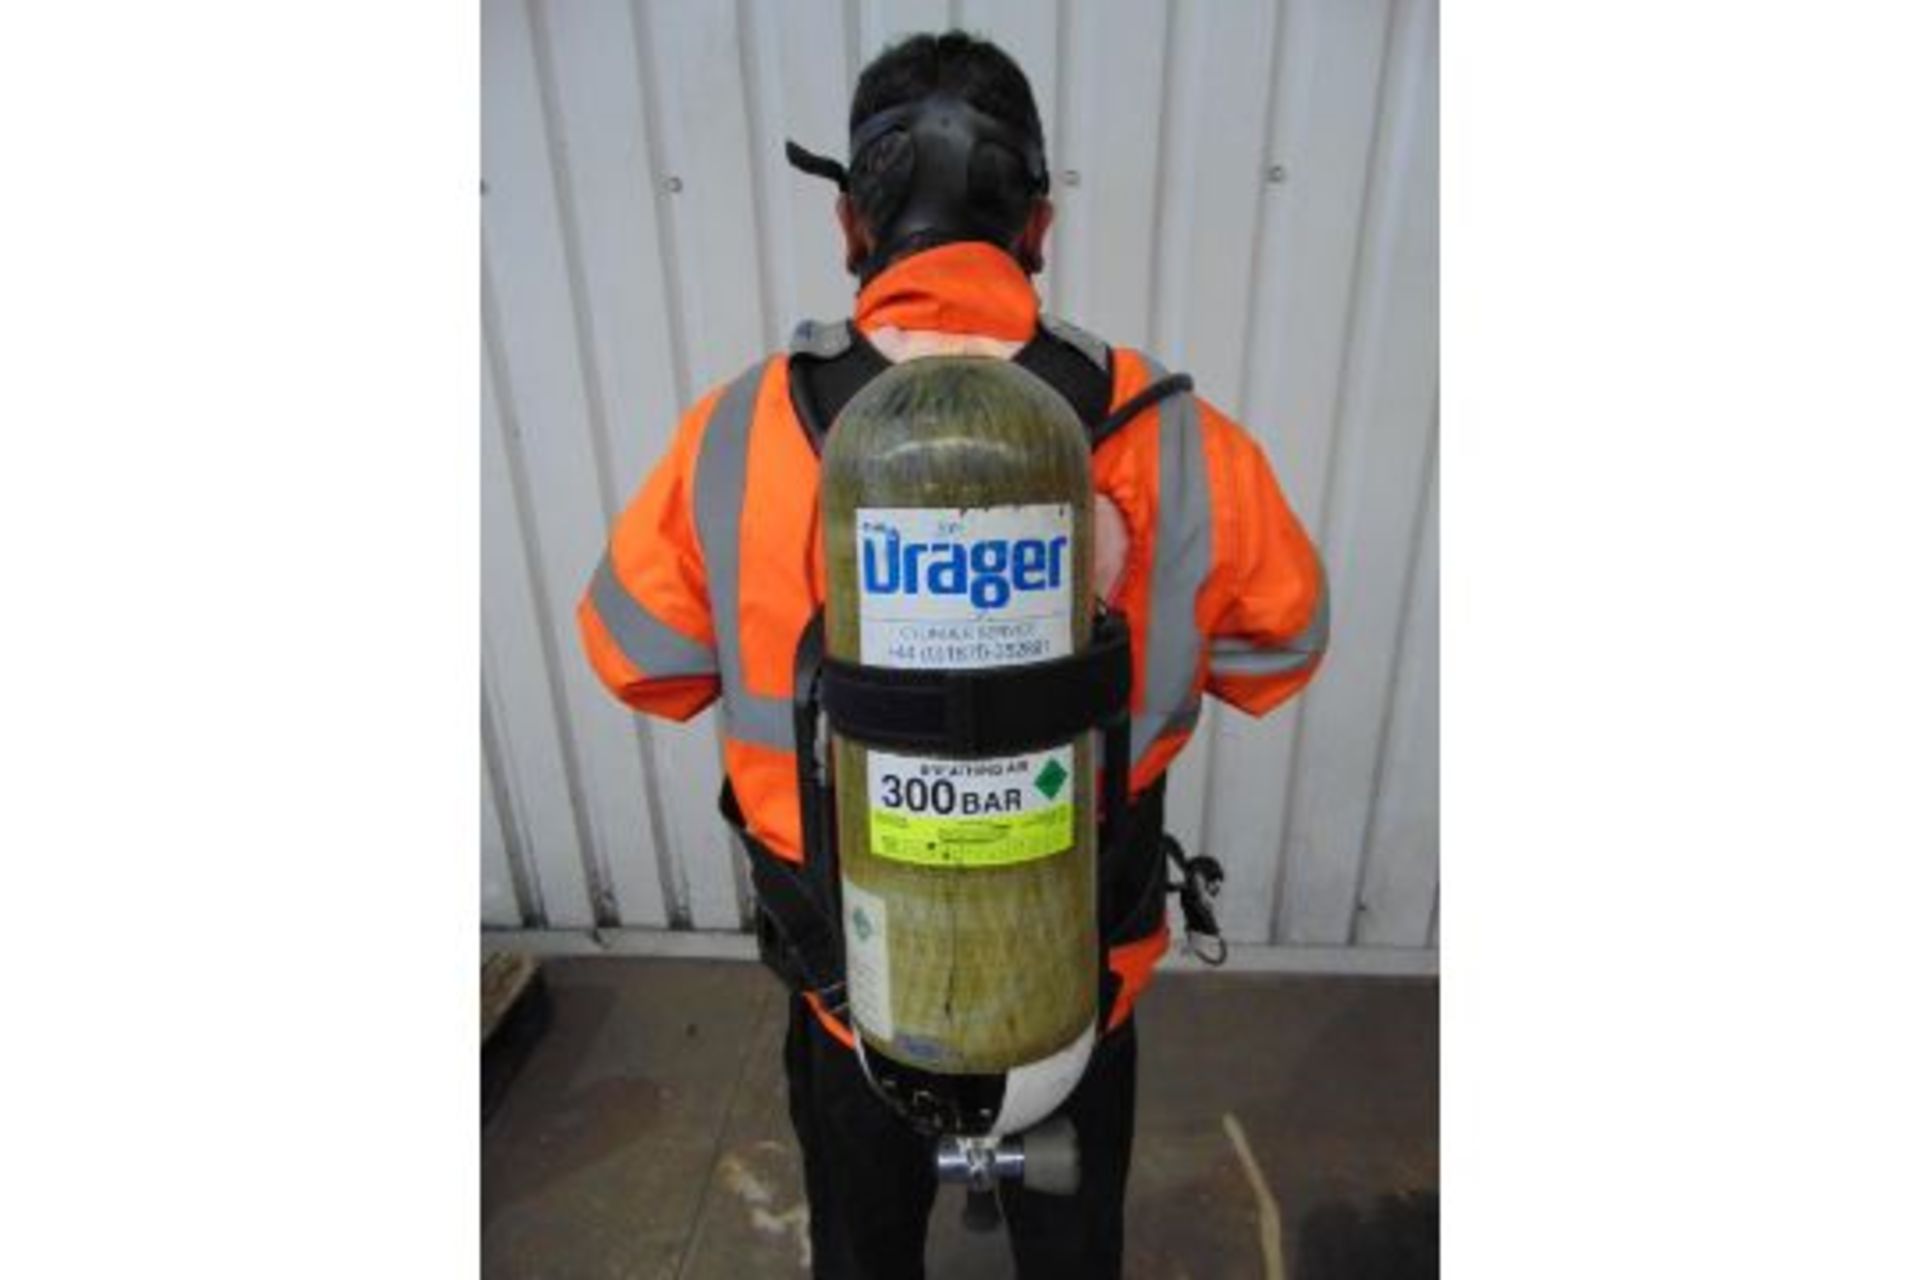 5 x Drager PSS 7000 Self Contained Breathing Apparatus w/ 10 x Drager 300 Bar Air Cylinders - Image 20 of 28